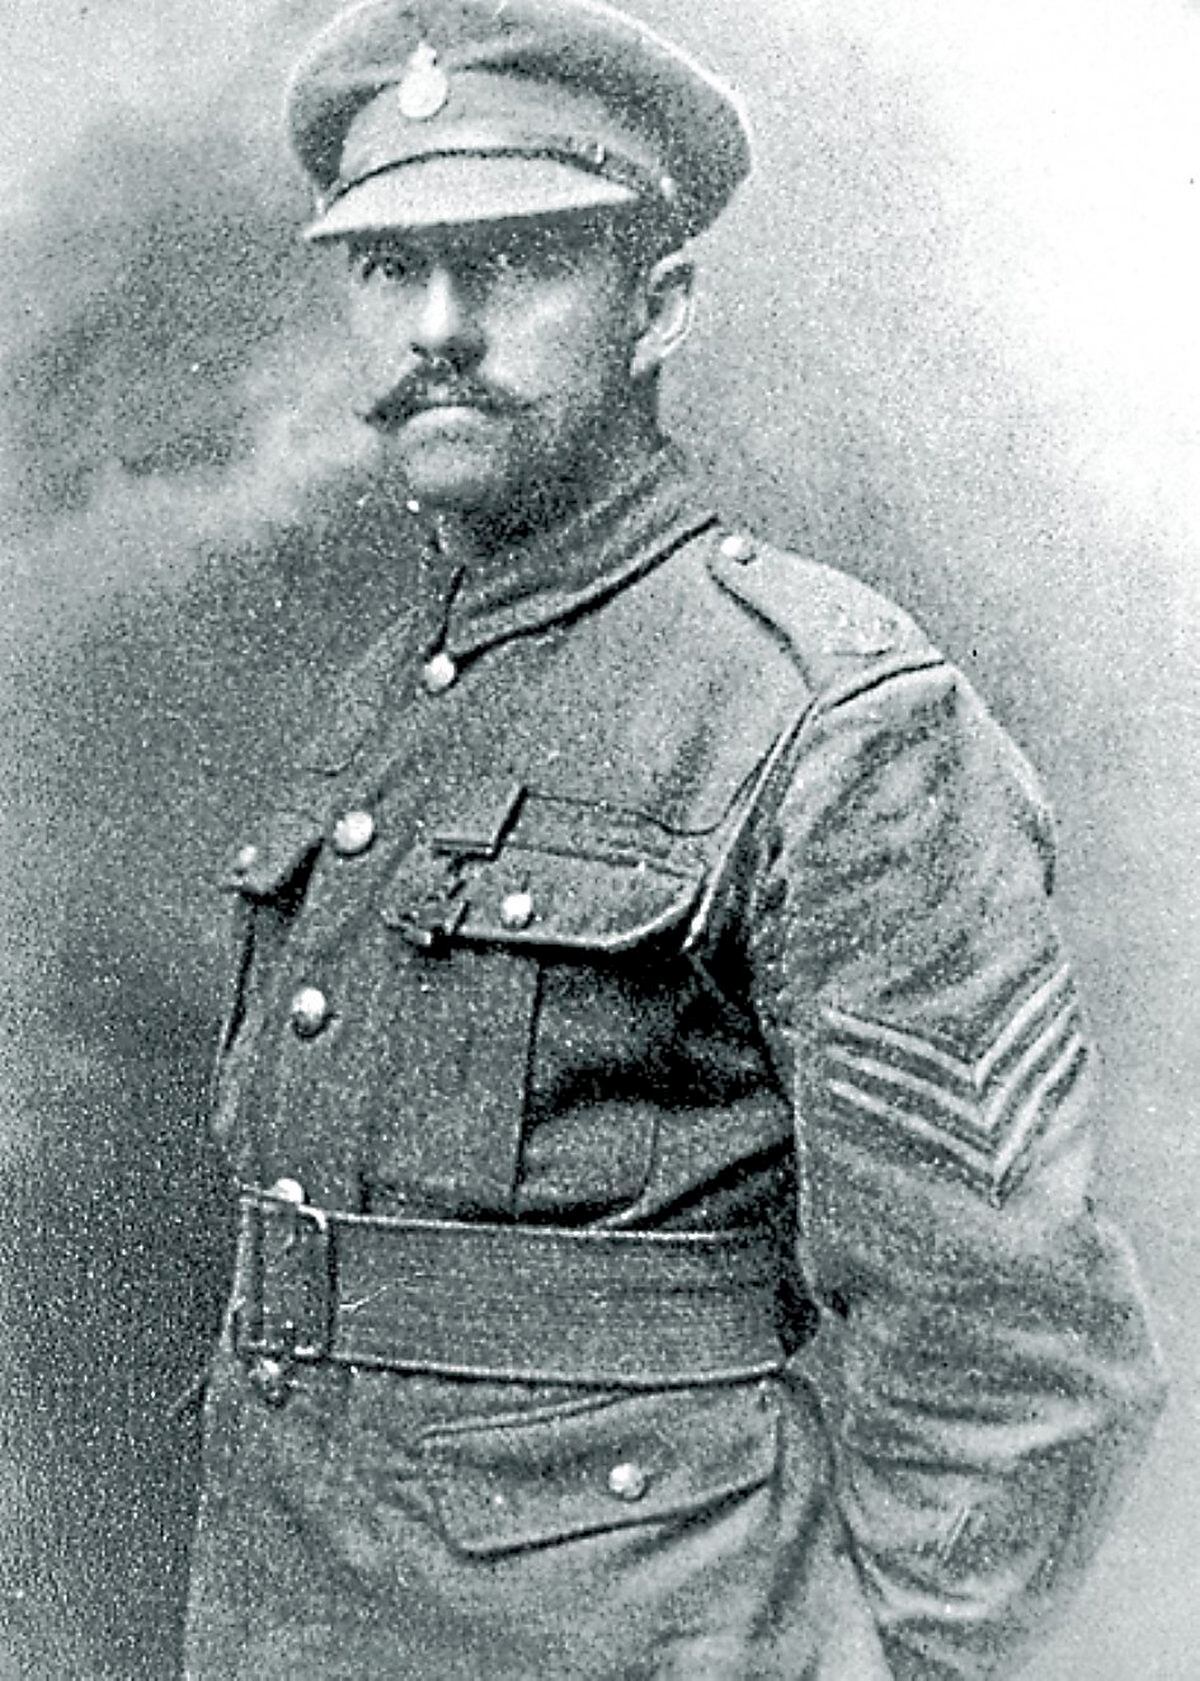 Sergeant Harold Whitfield with his Victoria Cross and proudly wearing the Shropshire Yeomanry cap badge.